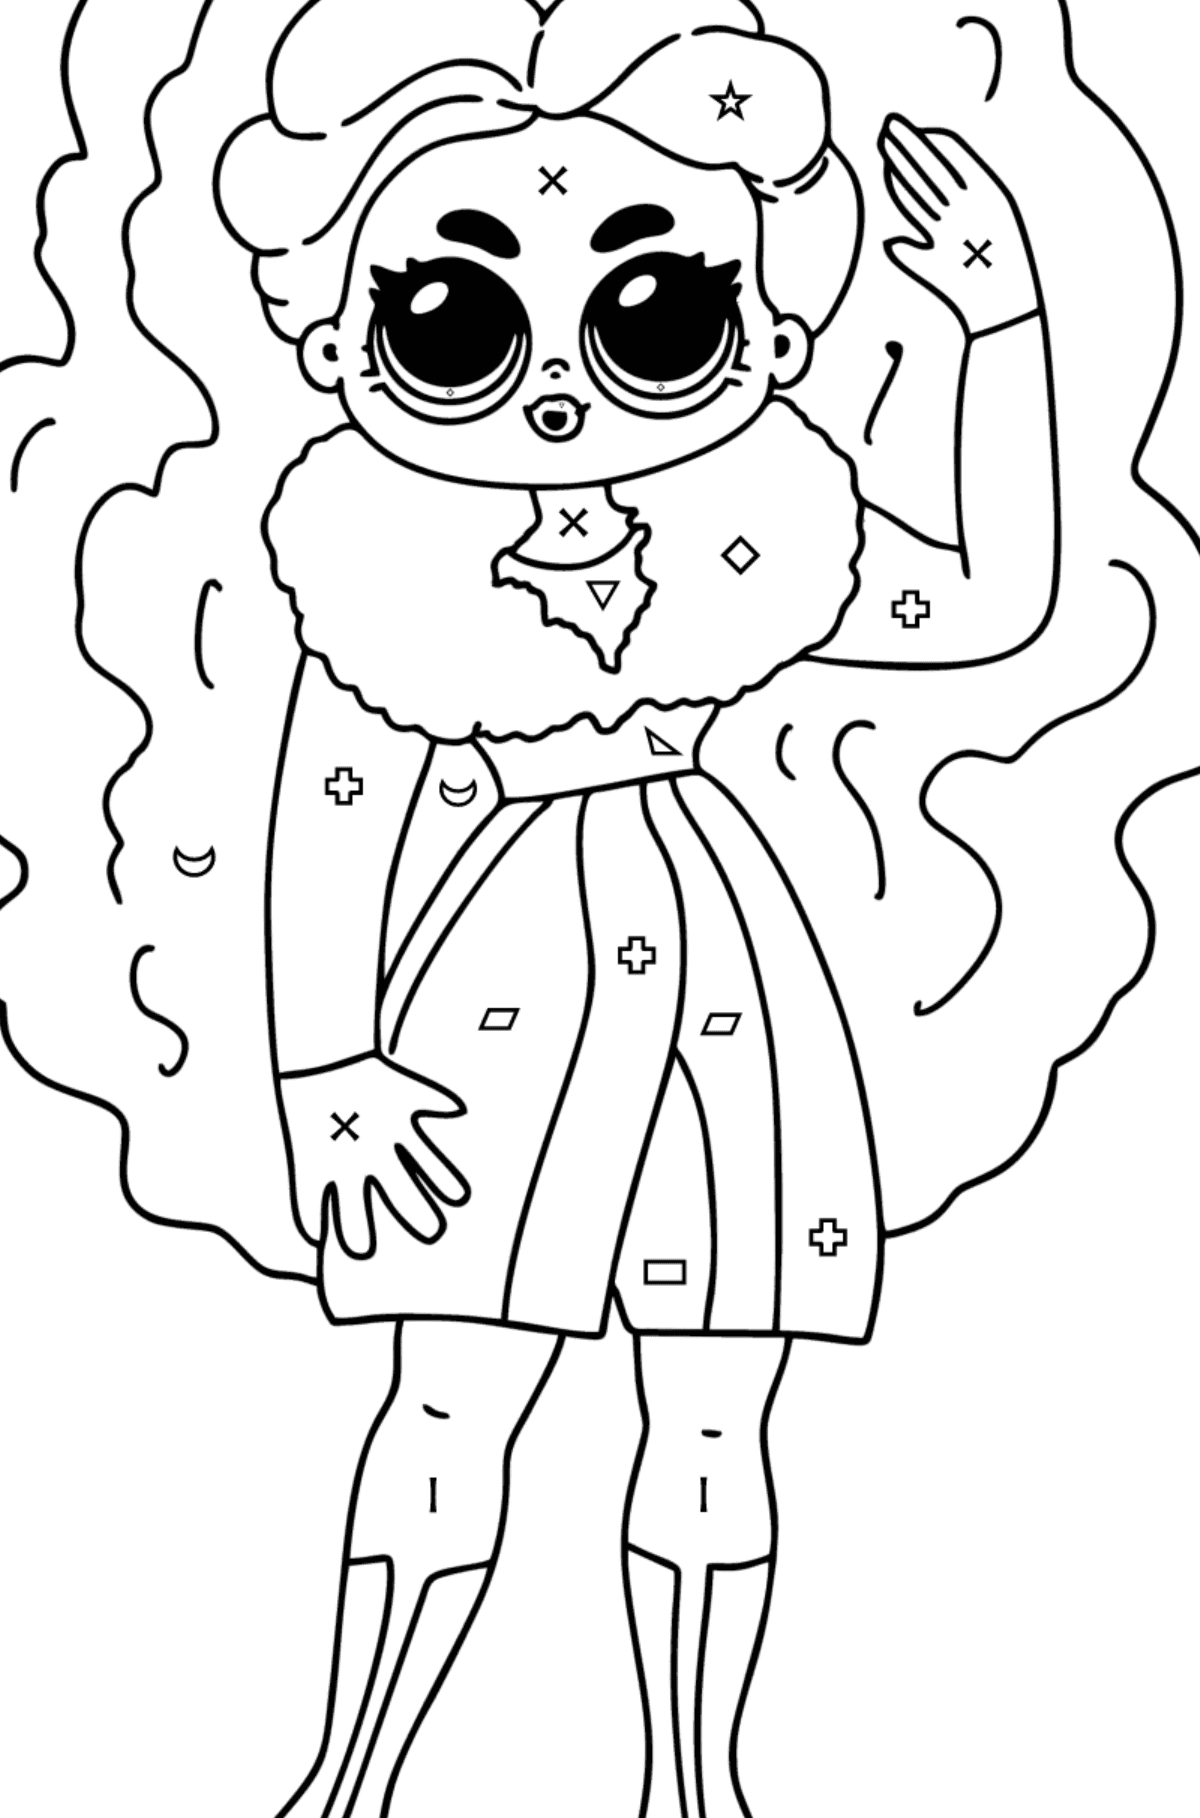 Coloring page LOL OMG Cute Girl - Coloring by Symbols and Geometric Shapes for Kids